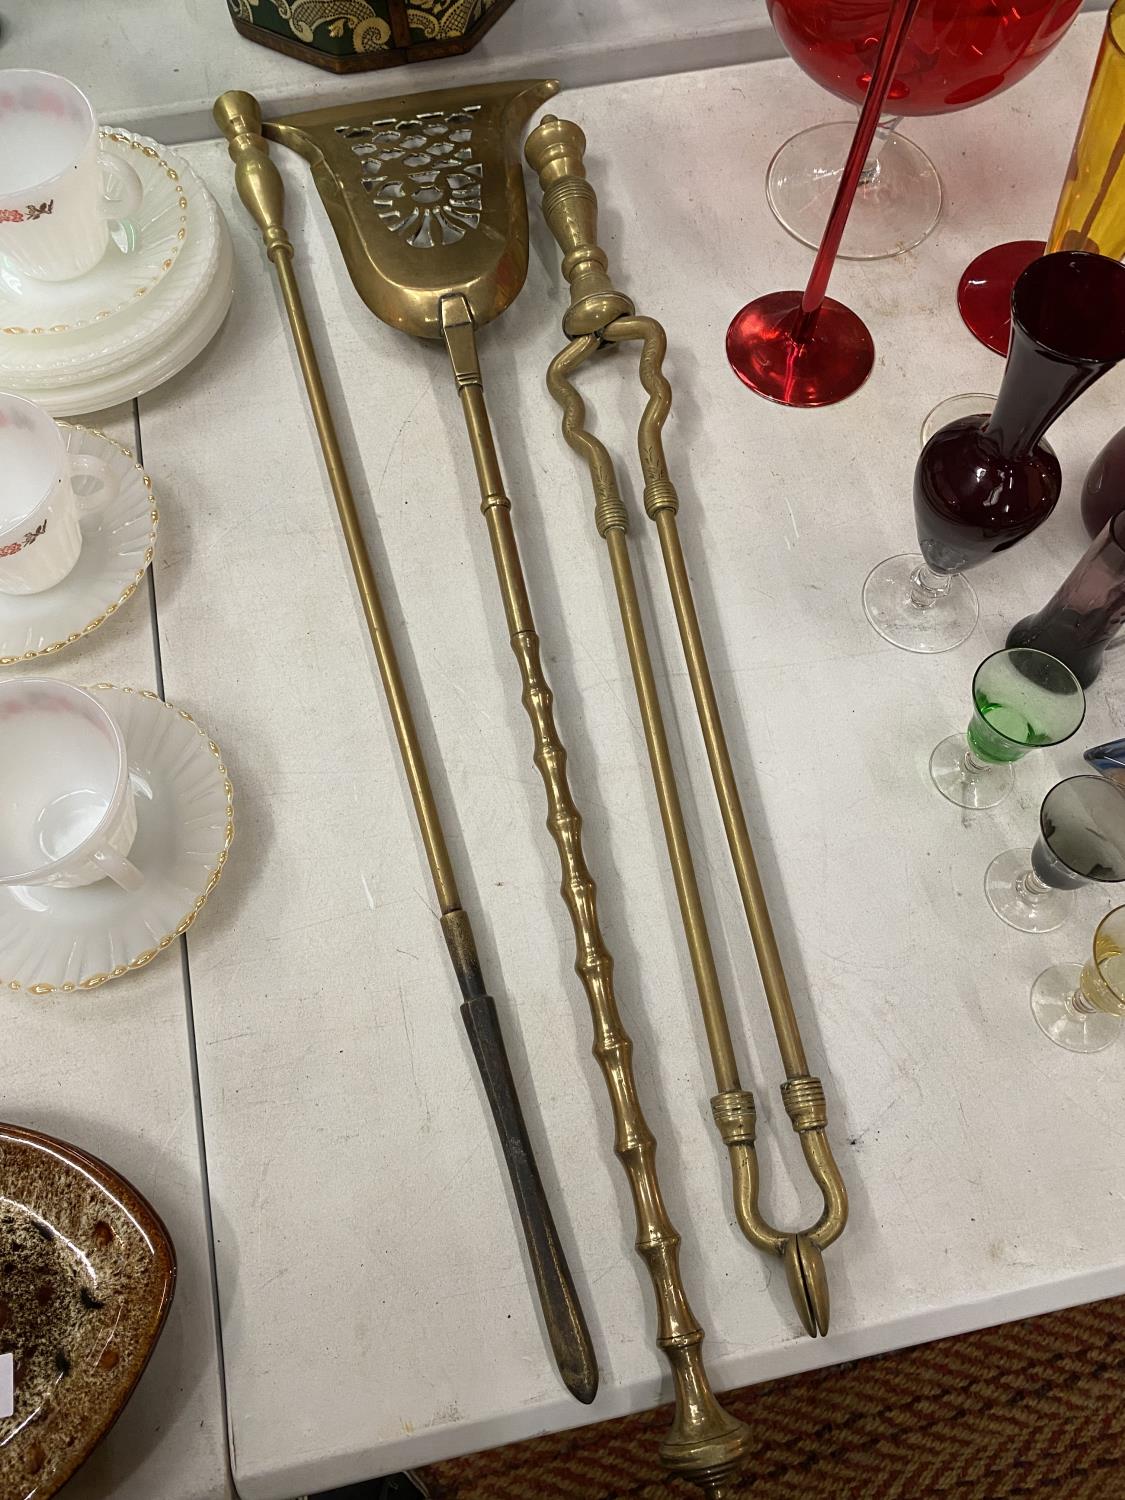 A SET OF BRASS FIRESIDE ITEMS TO INCLUDE, A POKER, TONGS AND A SHOVEL, SIZE 74CM